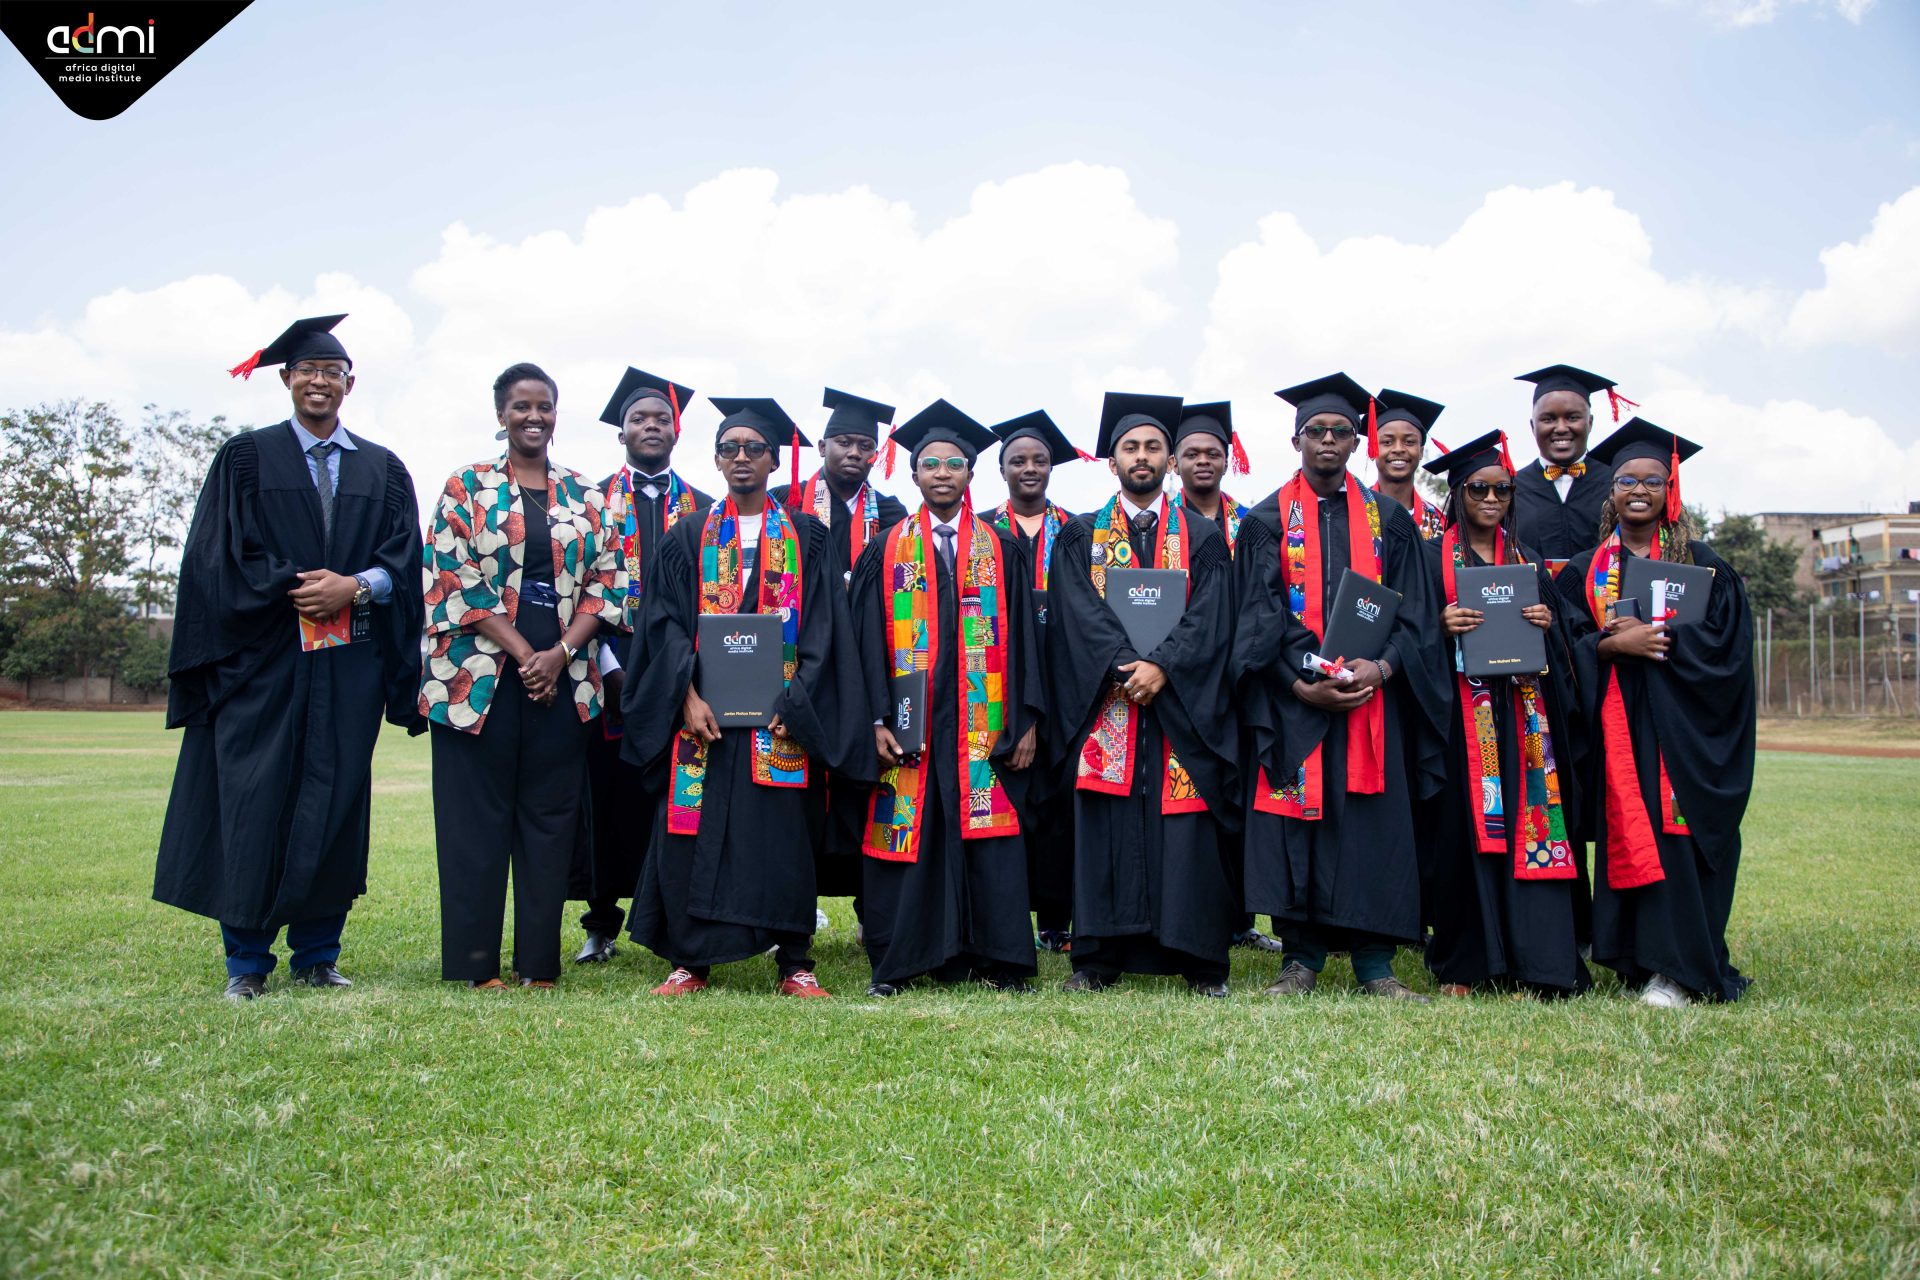 Graphic design students posing for a picture at the graduation ceremony